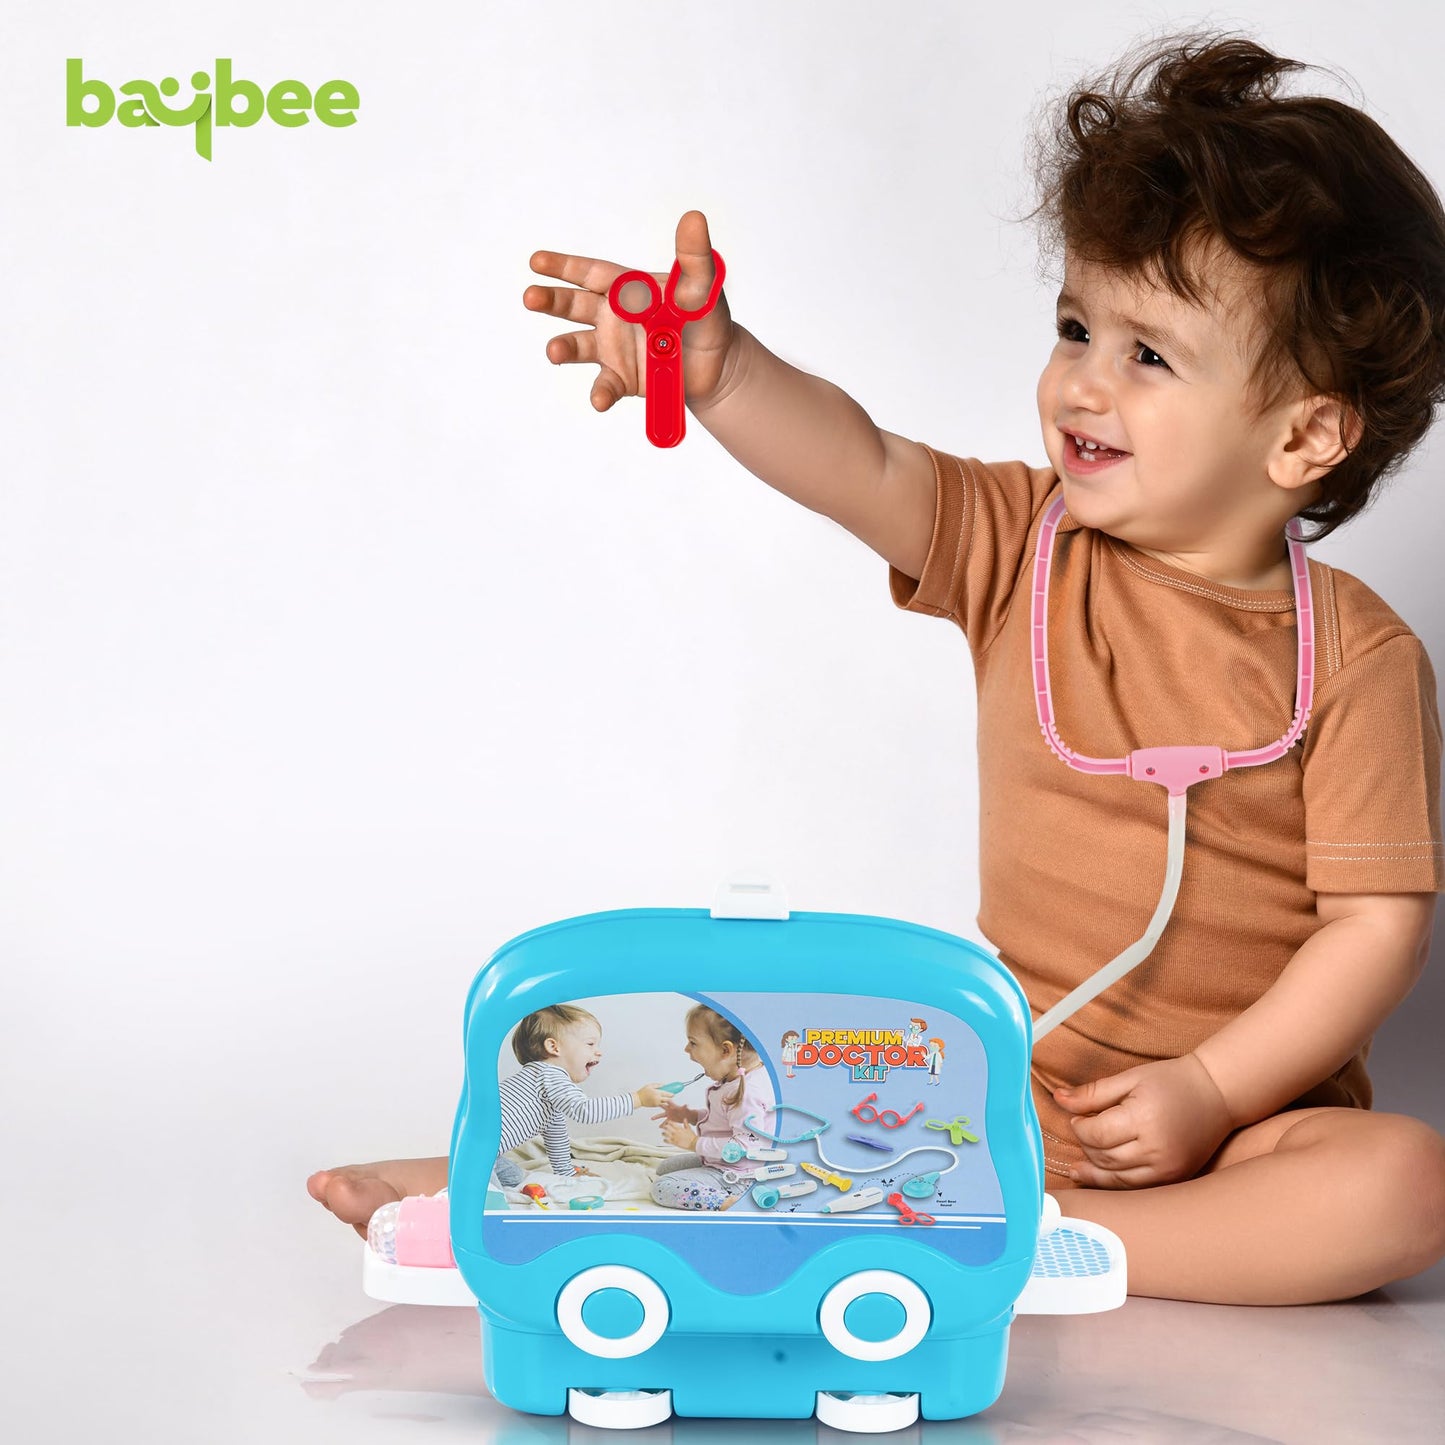 Baybee Doctor Play Set Toy for Kids with Foldable Suitcase Pretend Play Toy Set